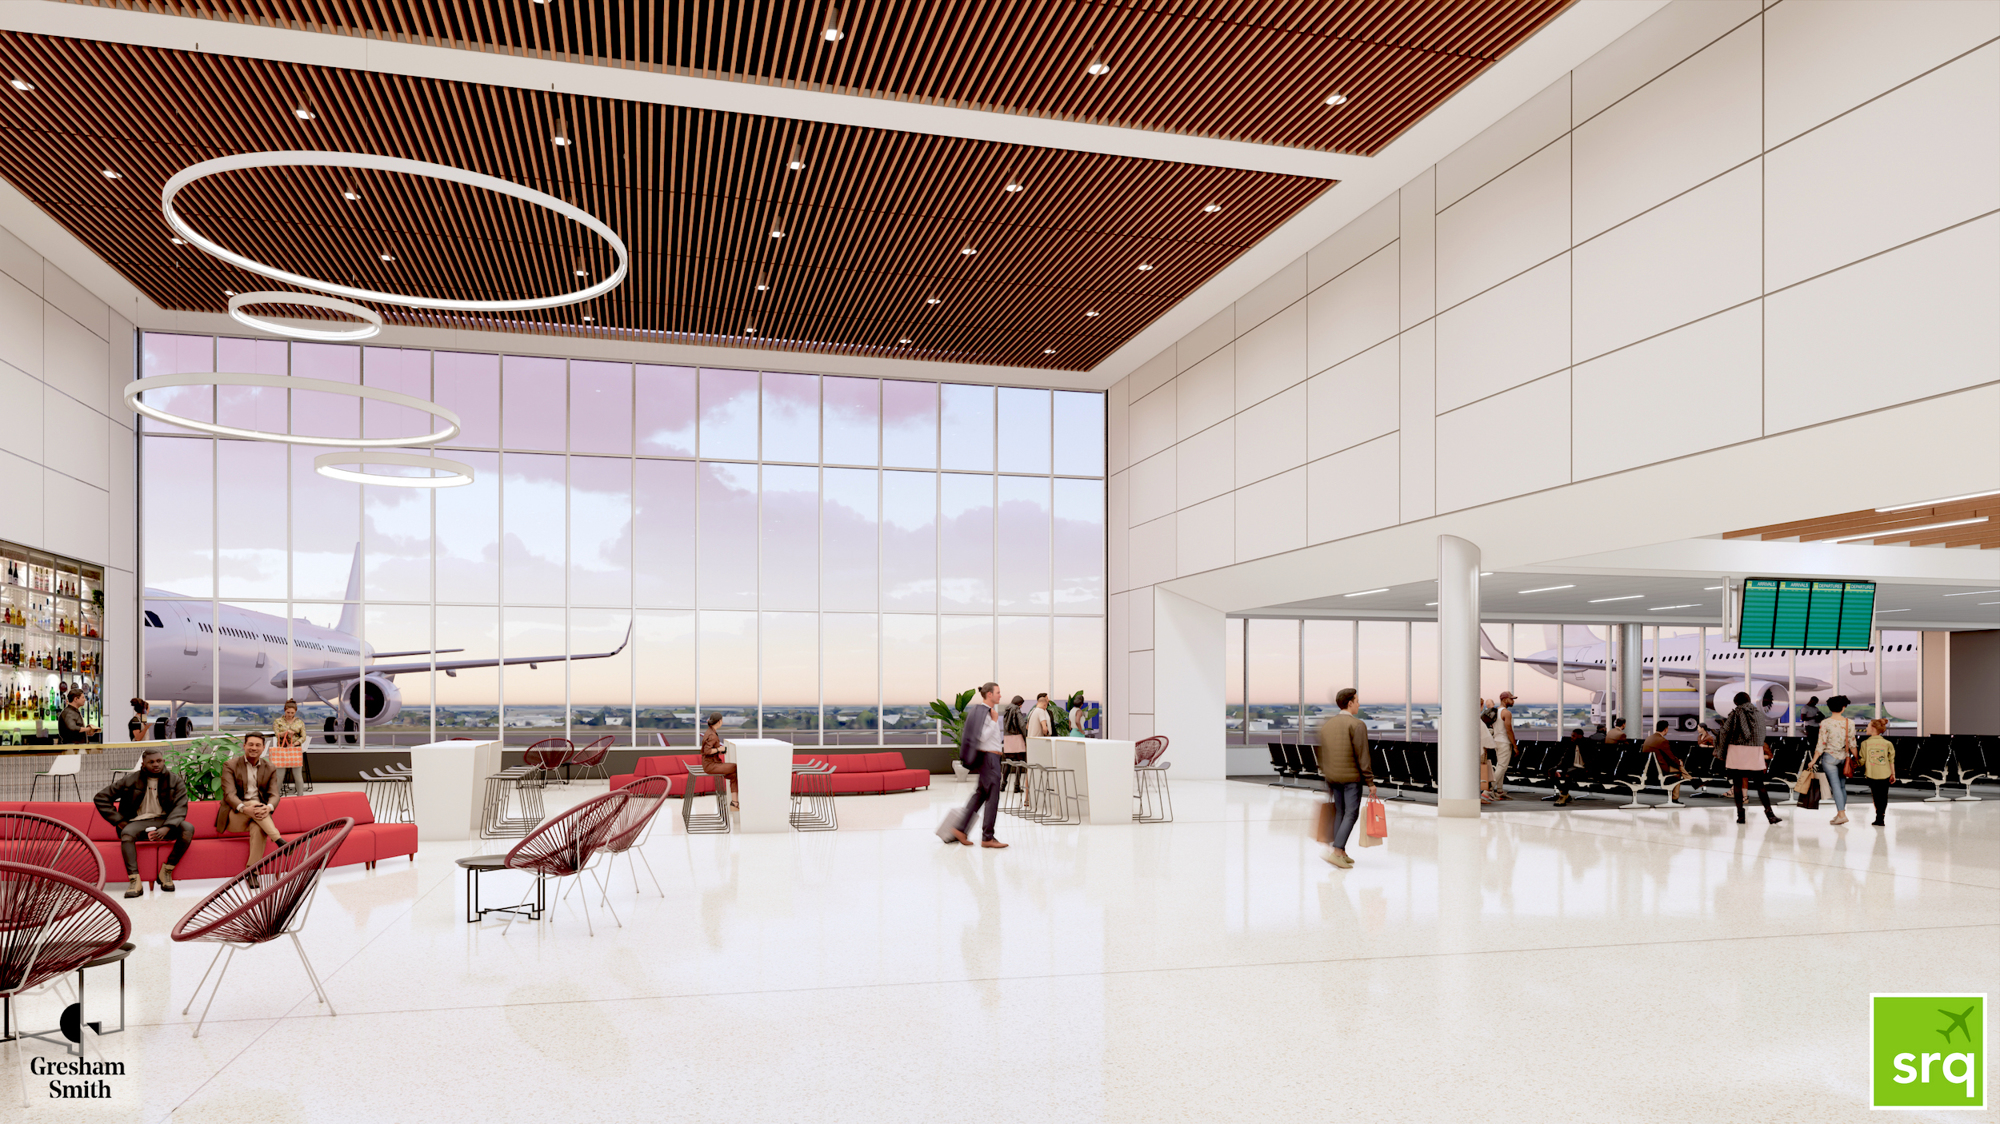 Courtesy. Sarasota-Bradenton International Airport is planning a $72 million design-build project that will add a ground-based boarding facility capable of serving upward of 2.5 million passengers a year through five new gates.